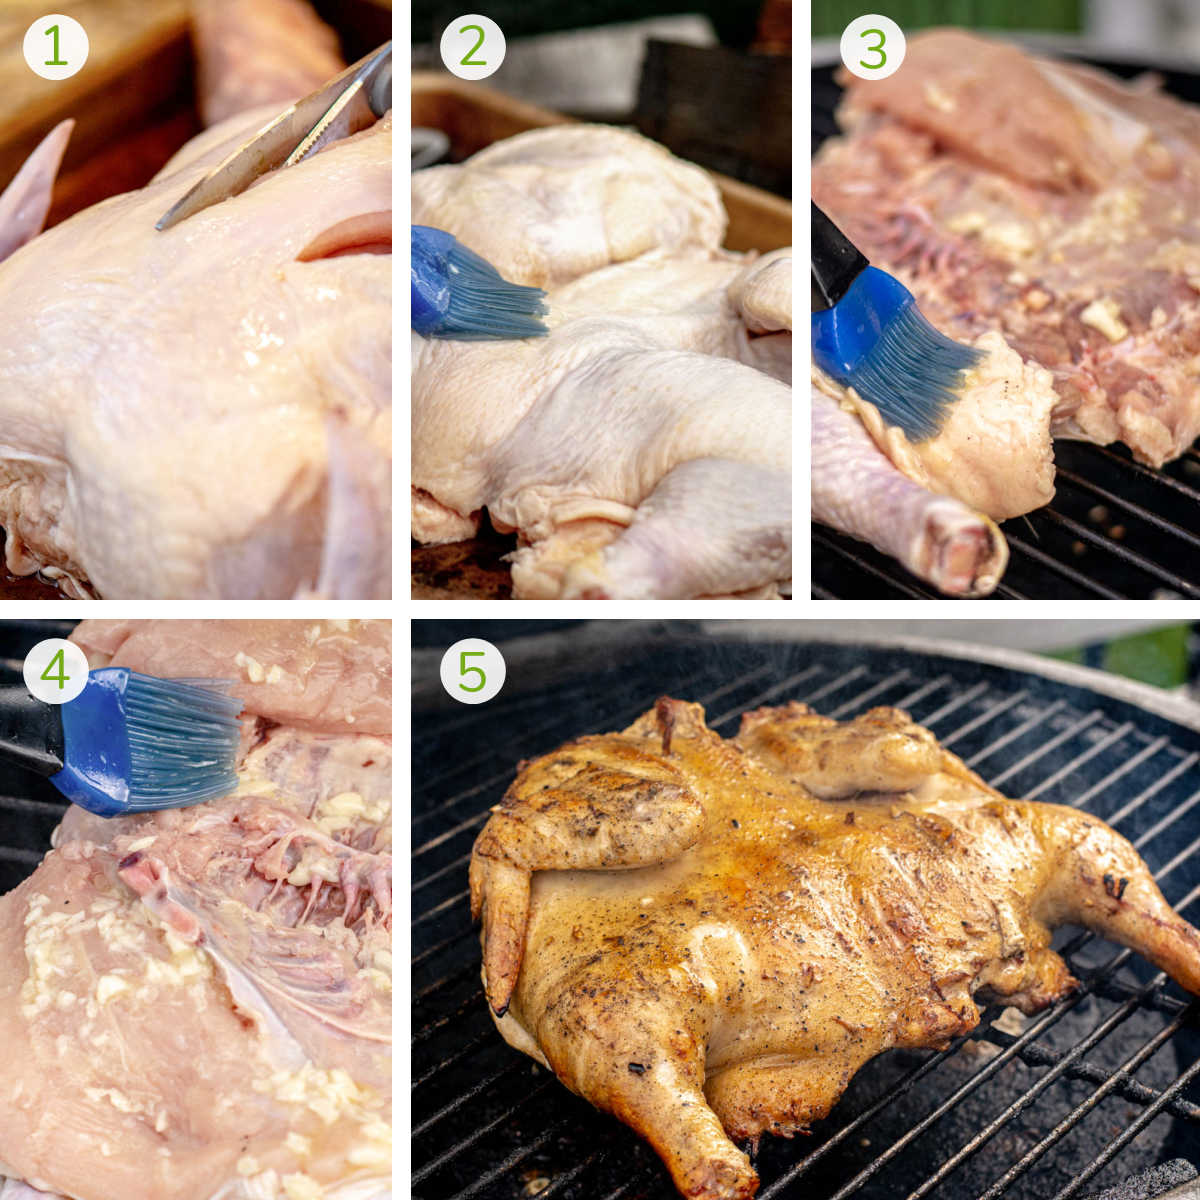 process photos showing how to cut the chicken breast, brushing both sides with a garlic butter and then grilling the chicken flat.